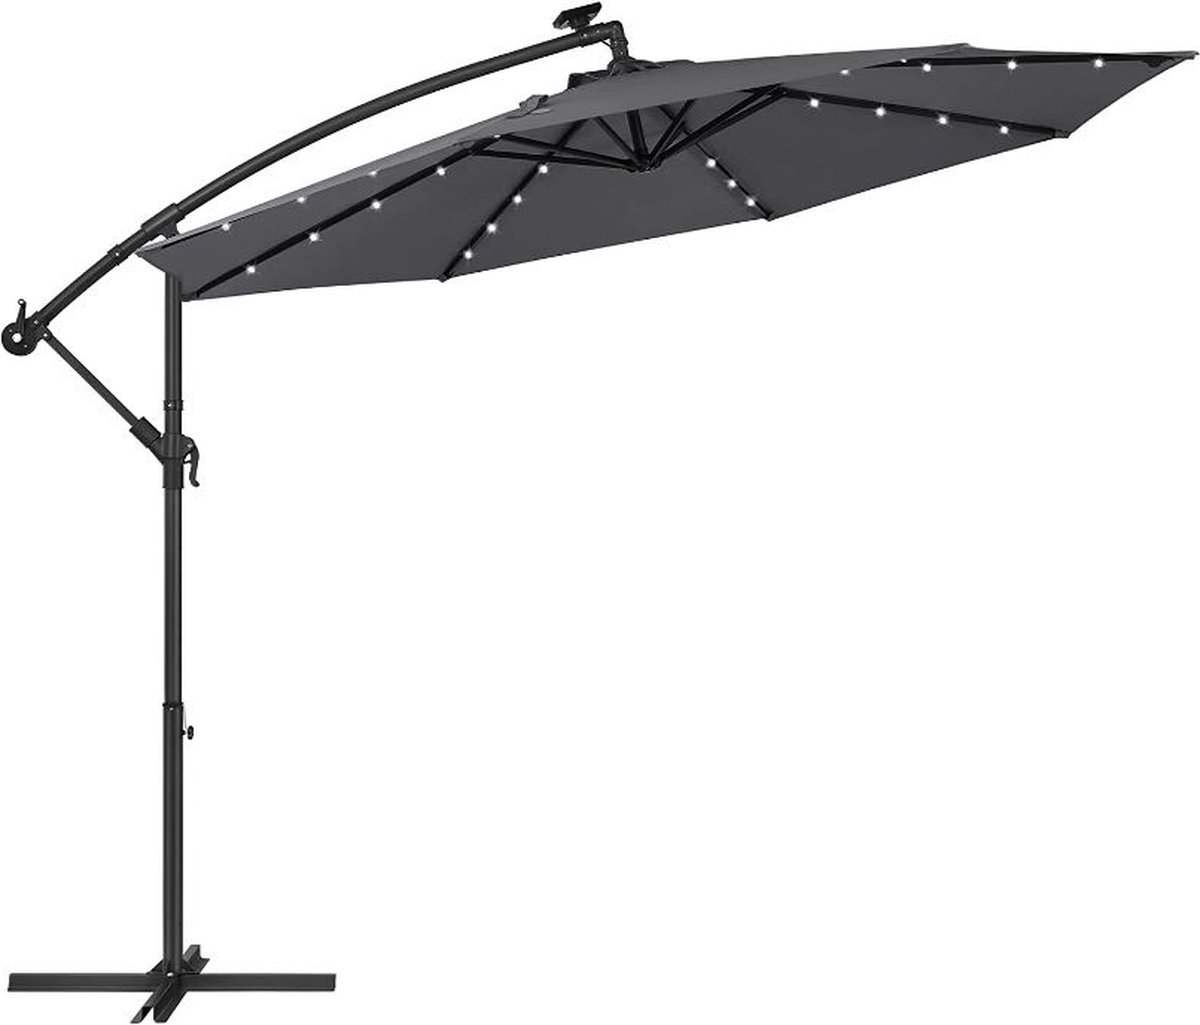 MIRA Home - Parasol - Zonnewering - Tuin - LED-verlichting - Grijs - 245x300